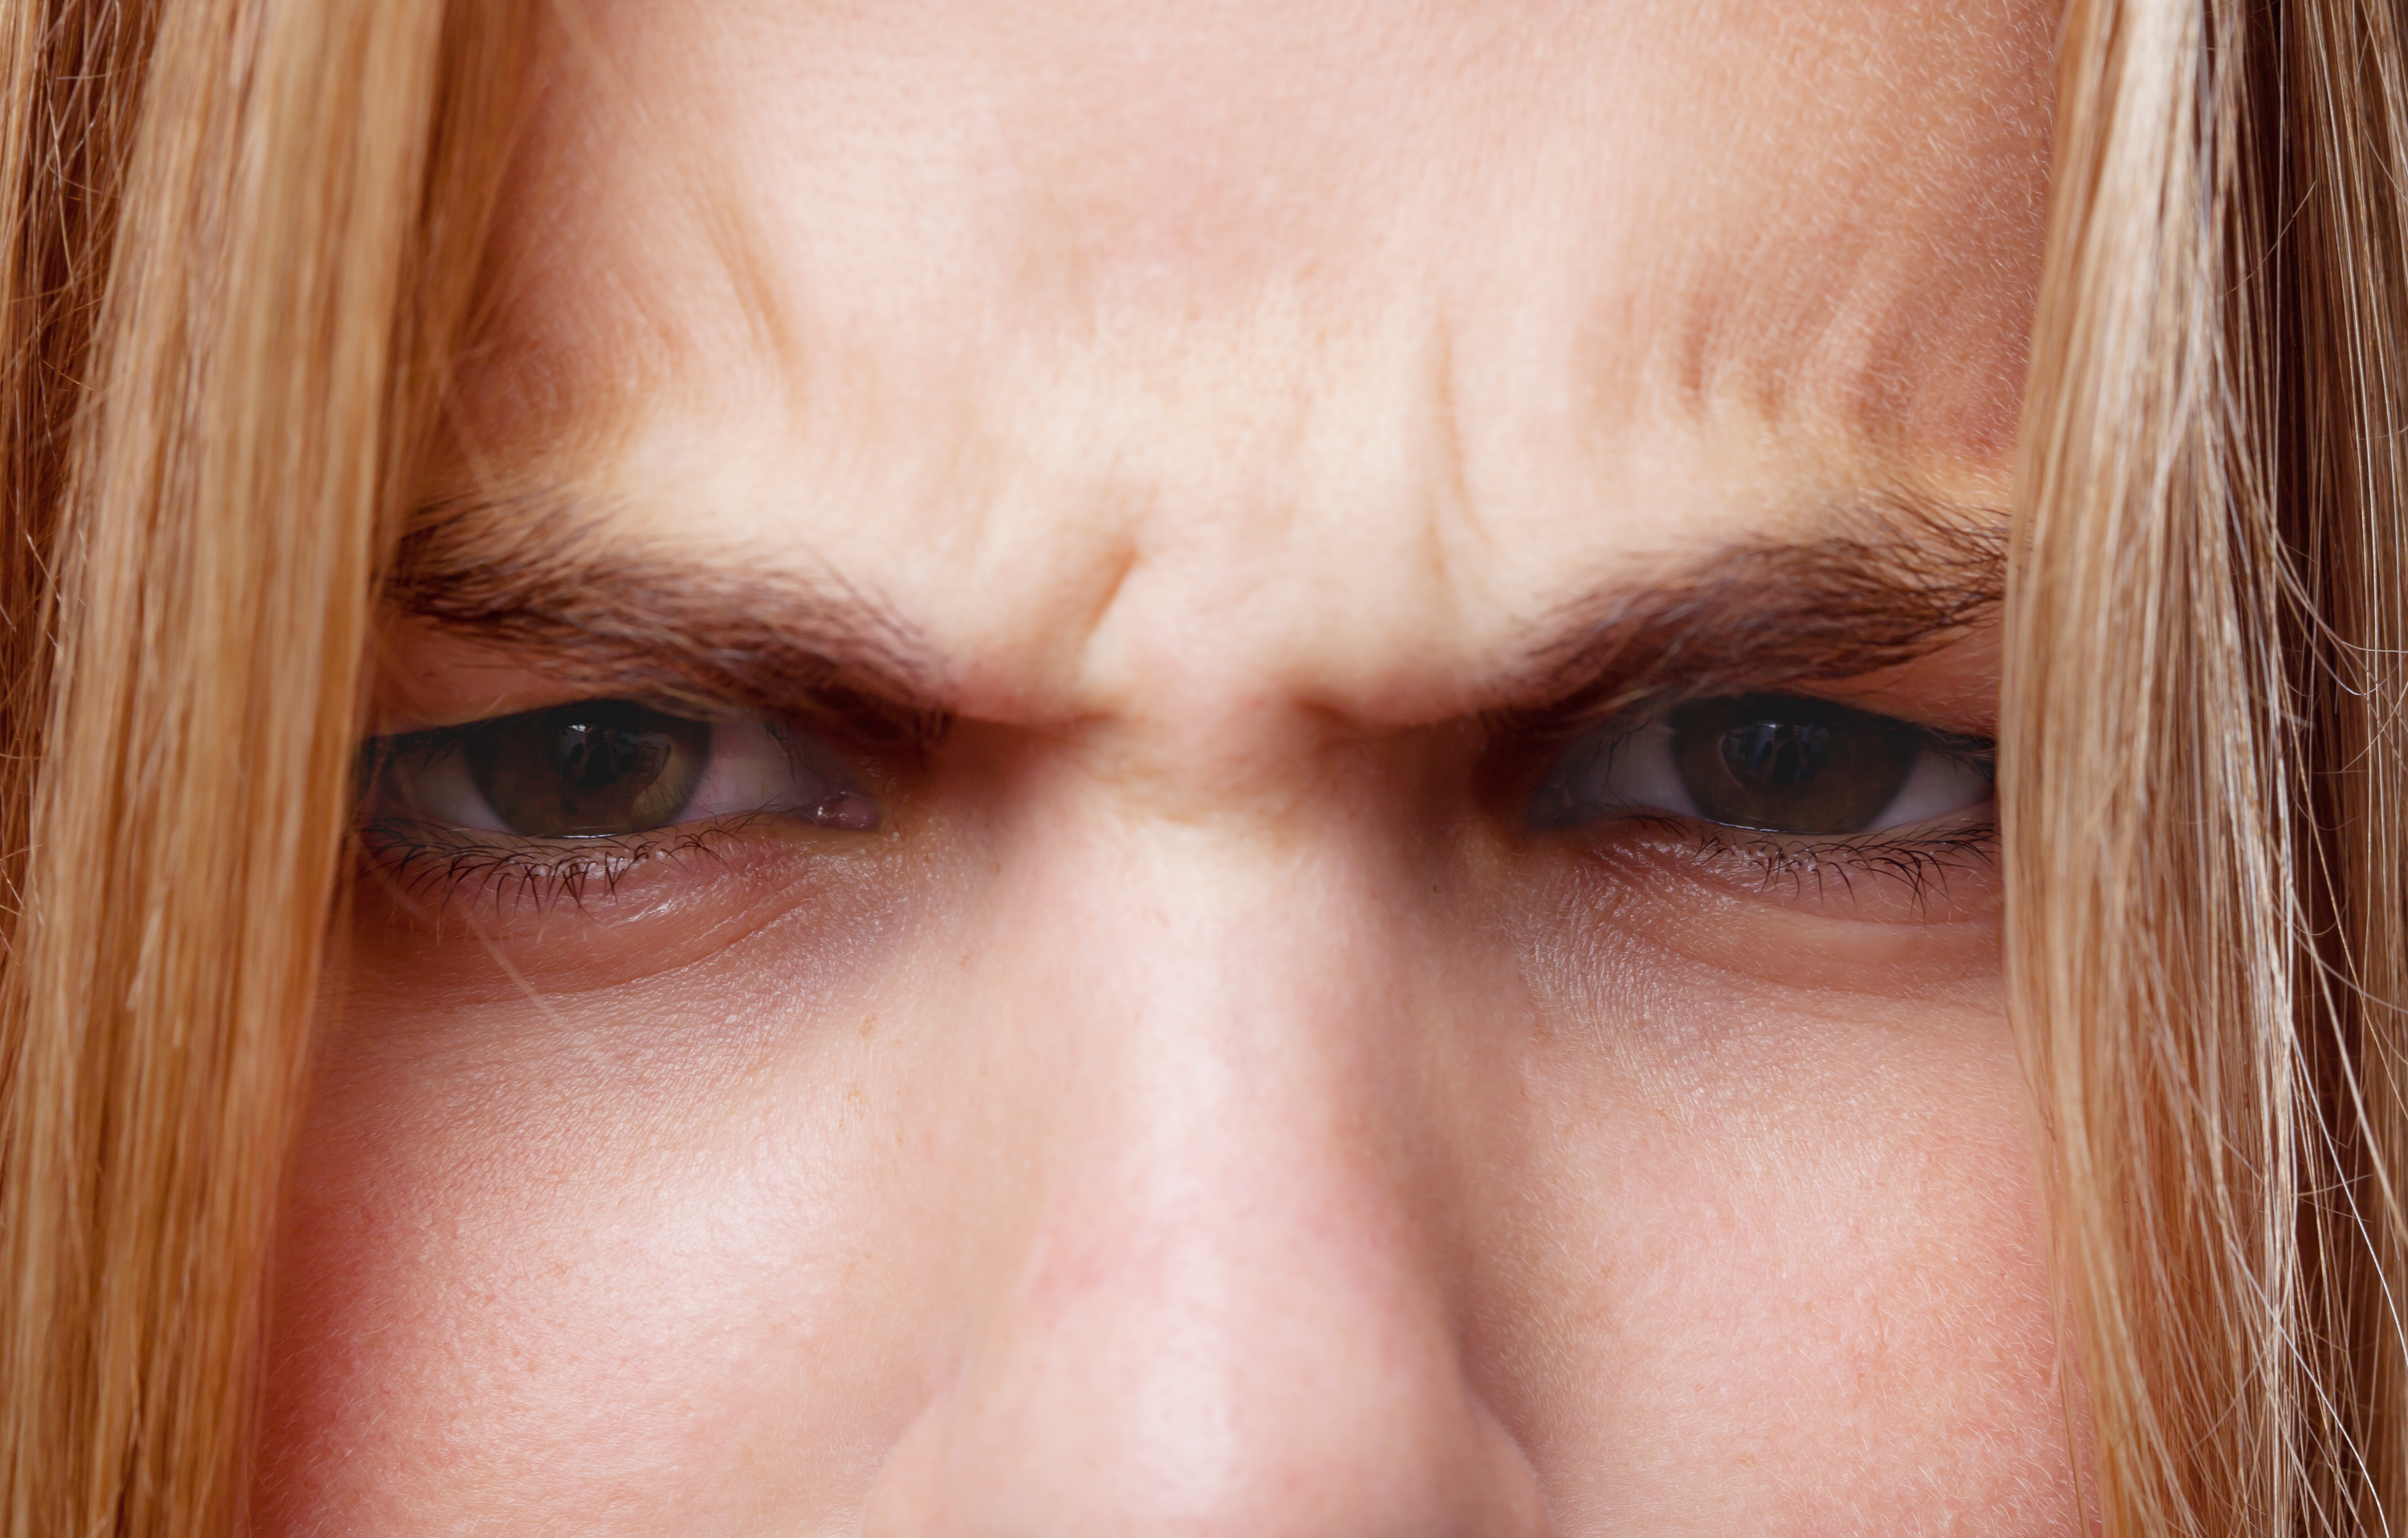 Close-up of an angry woman's eyes | Source: Shutterstock